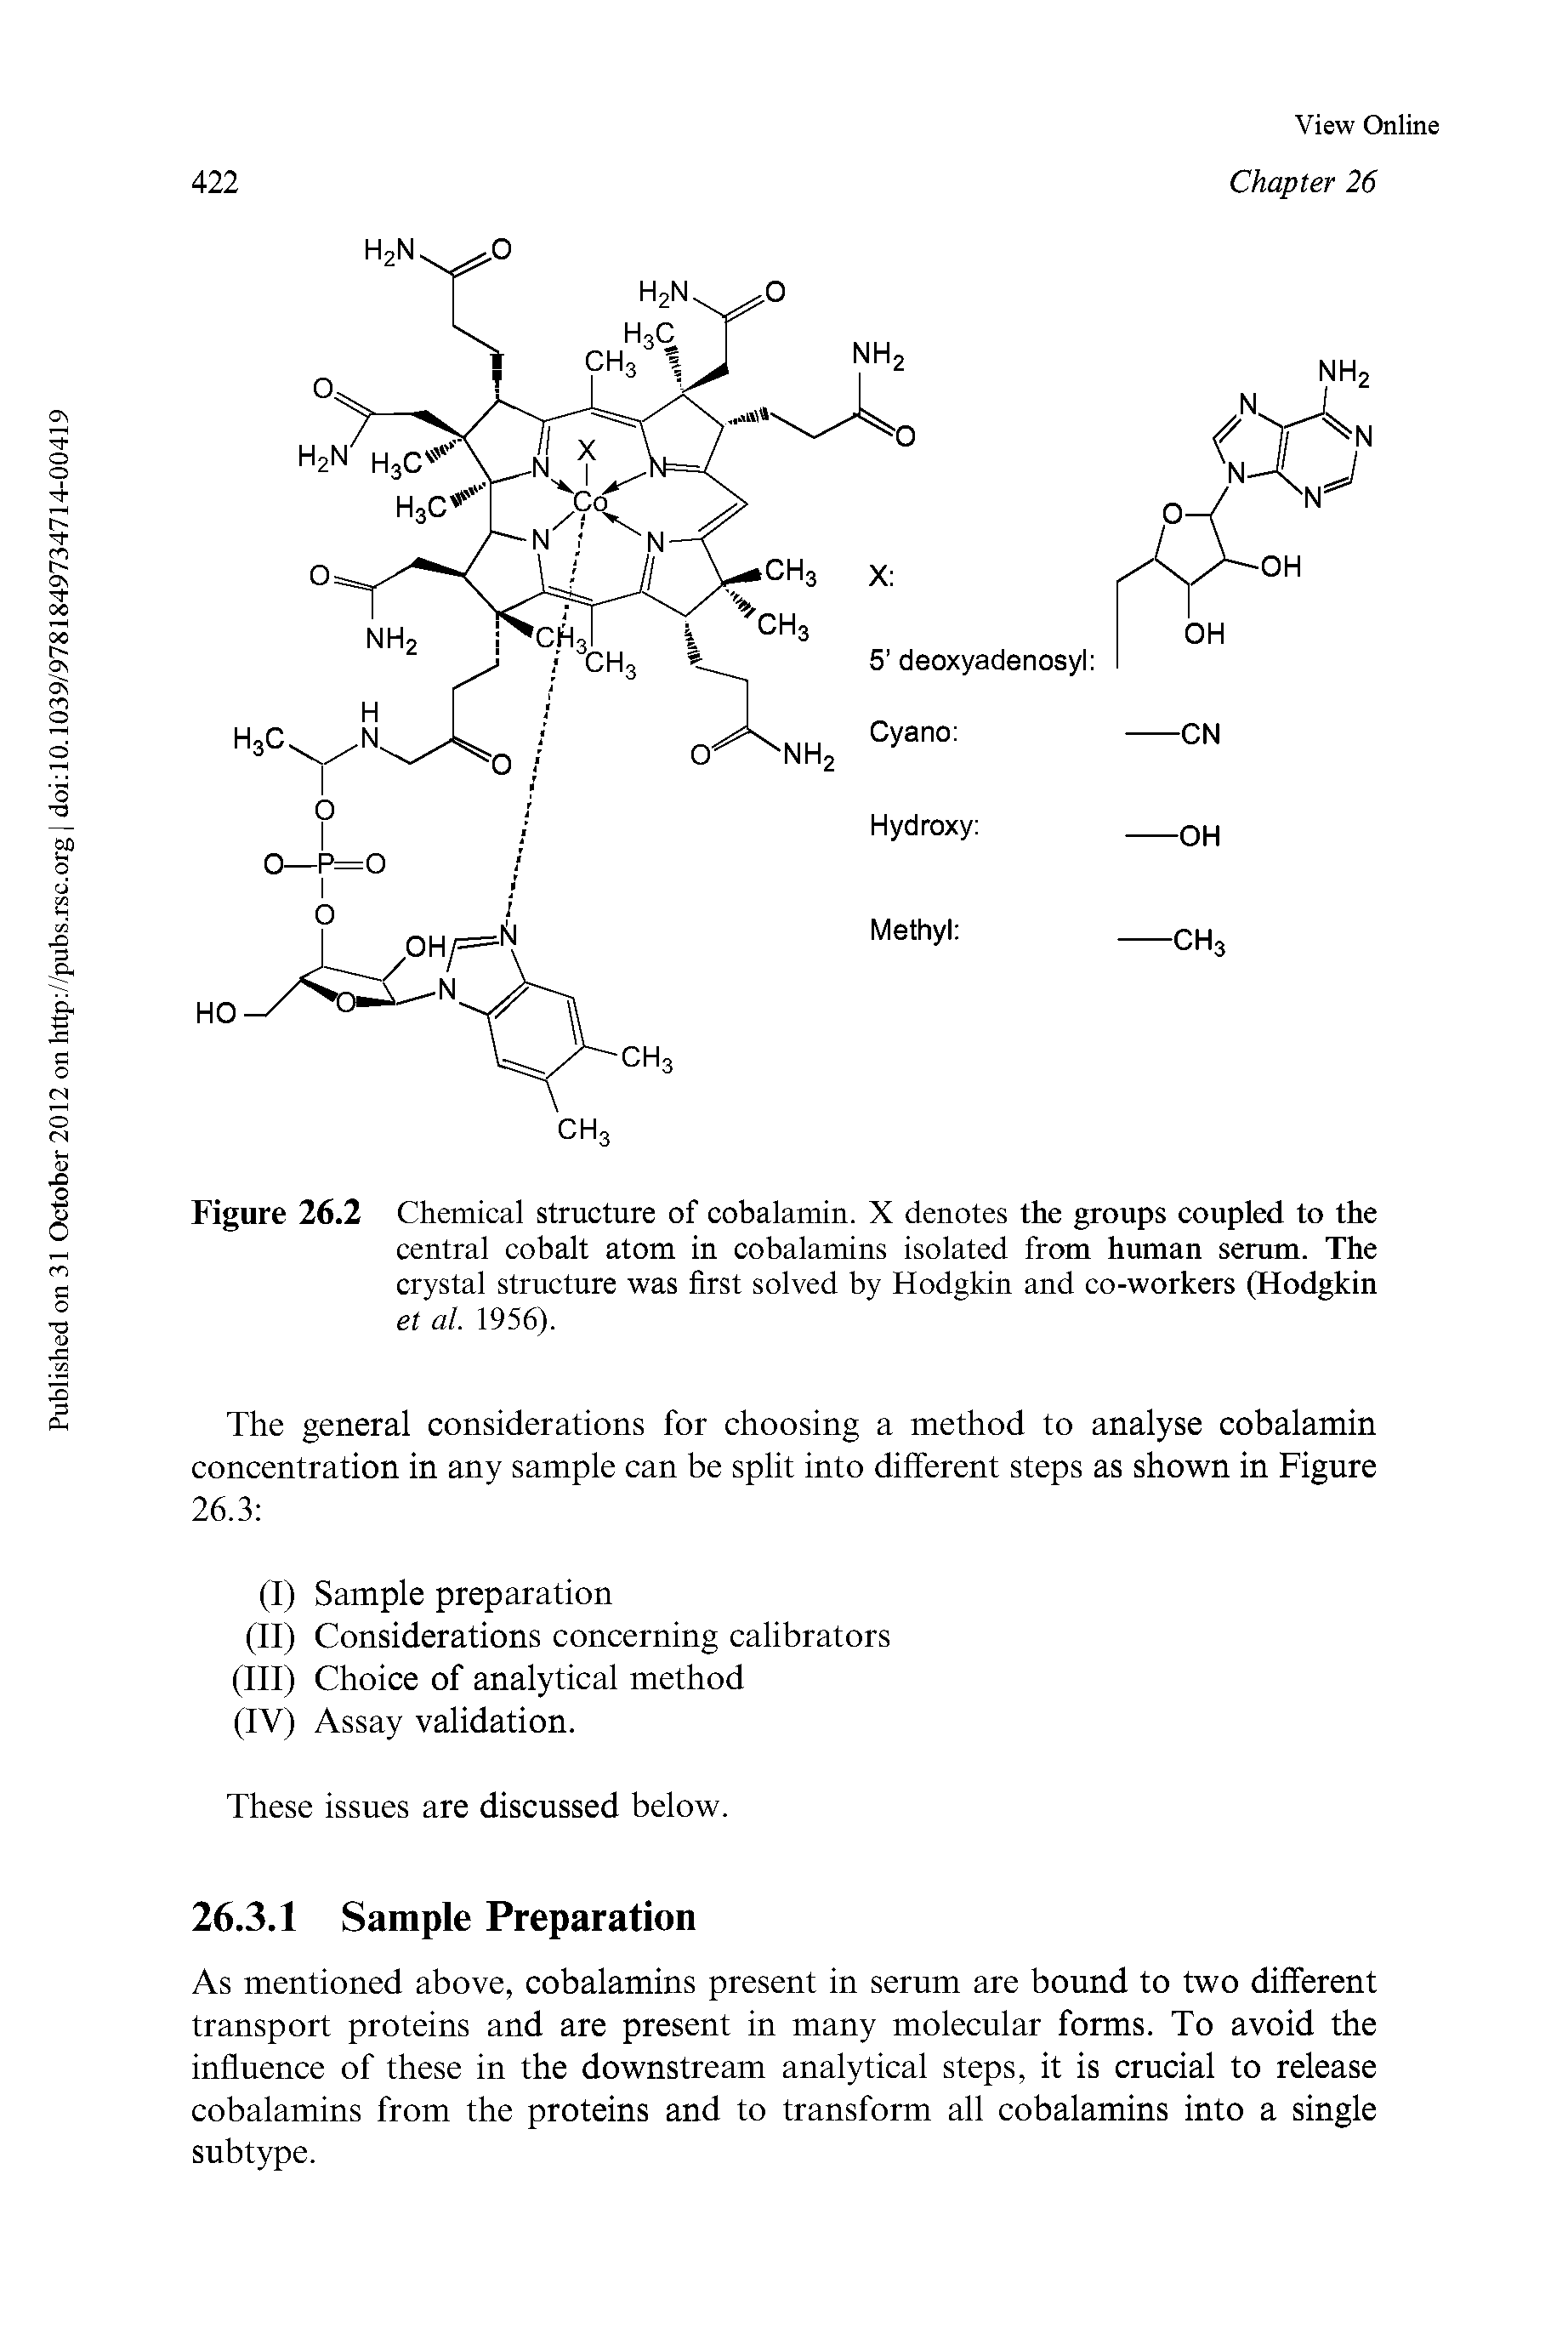 Figure 26.2 Chemical structure of cobalamin. X denotes the groups coupled to the central cobalt atom in cobalamins isolated from human serum. The crystal structure was first solved by Hodgkin and co-workers (Hodgkin et al. 1956).